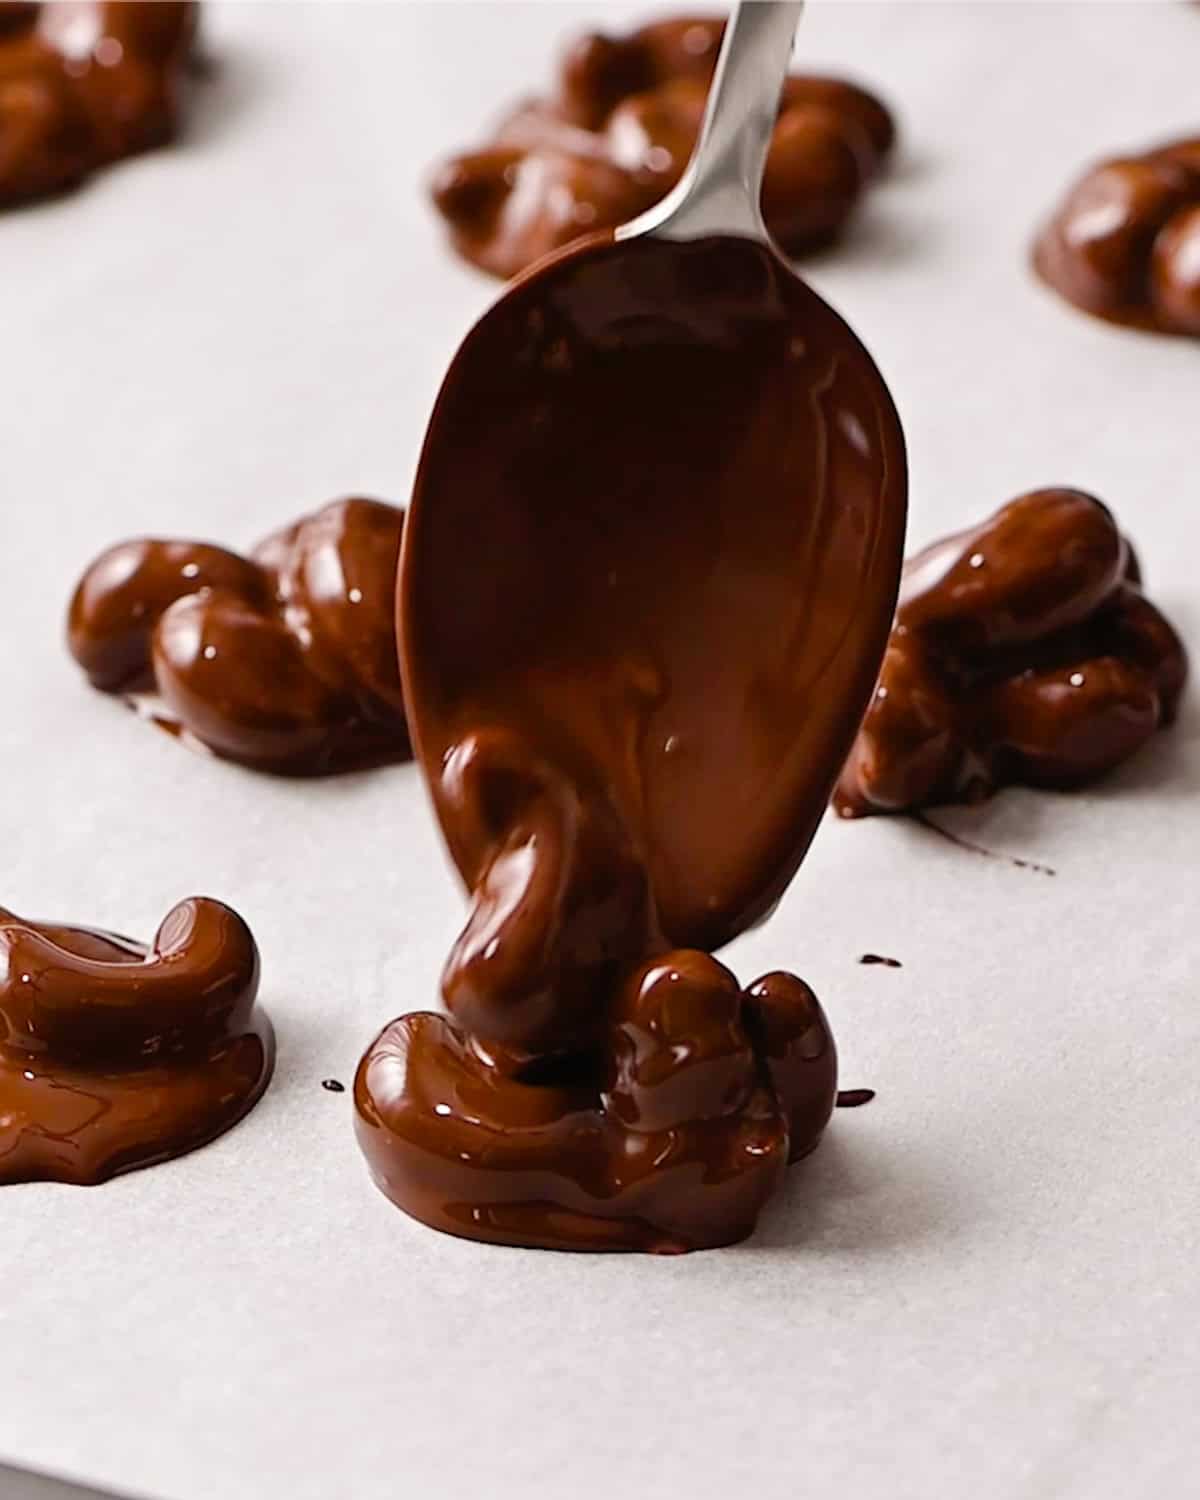 How to Make Chocolate Covered Cashews - making clusters on a parchment-lined baking sheet